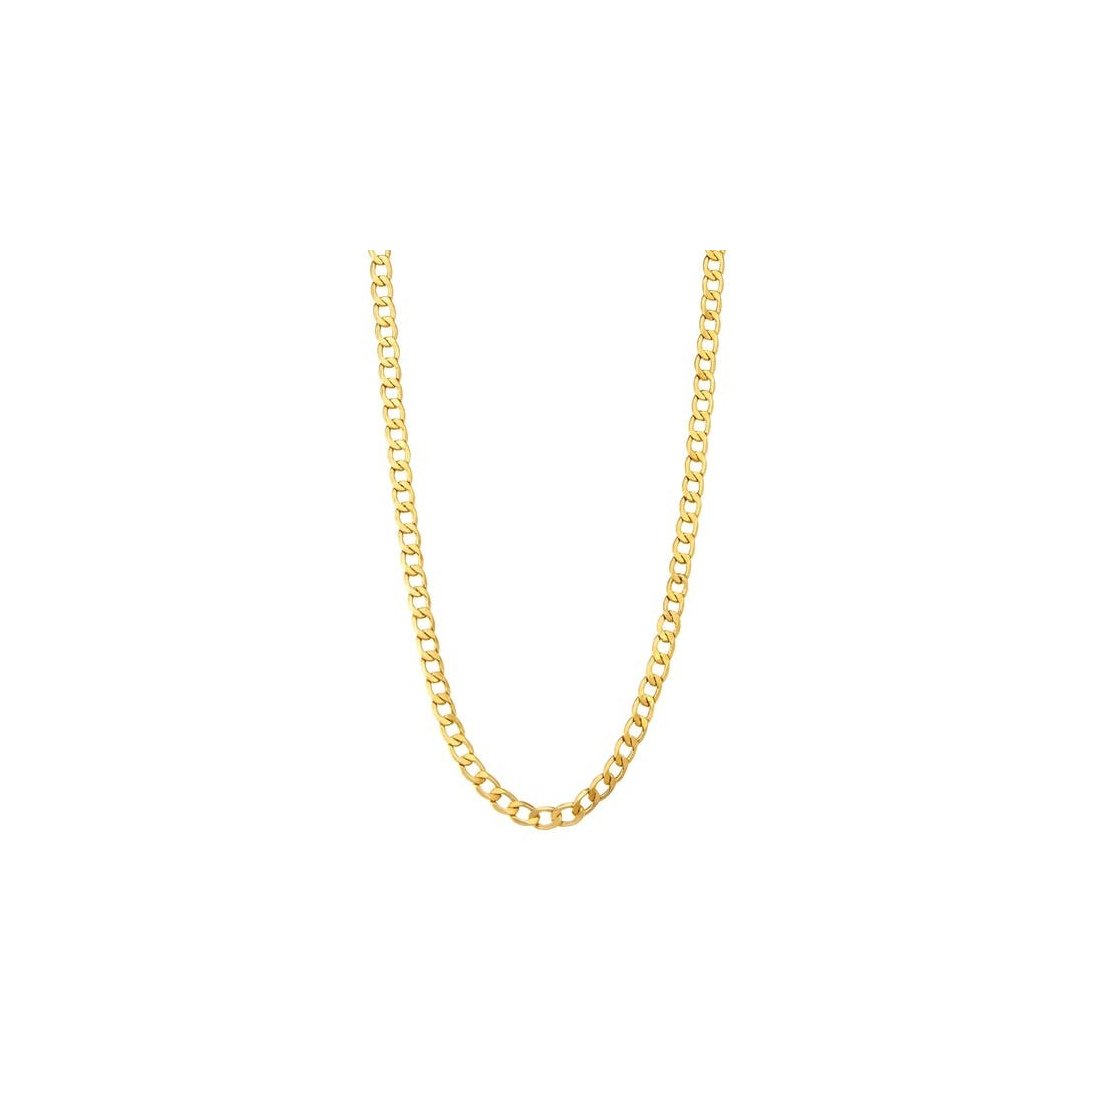 4MM 100 Yellow Gold Curb Chain .925 Sterling Silver "22-28"